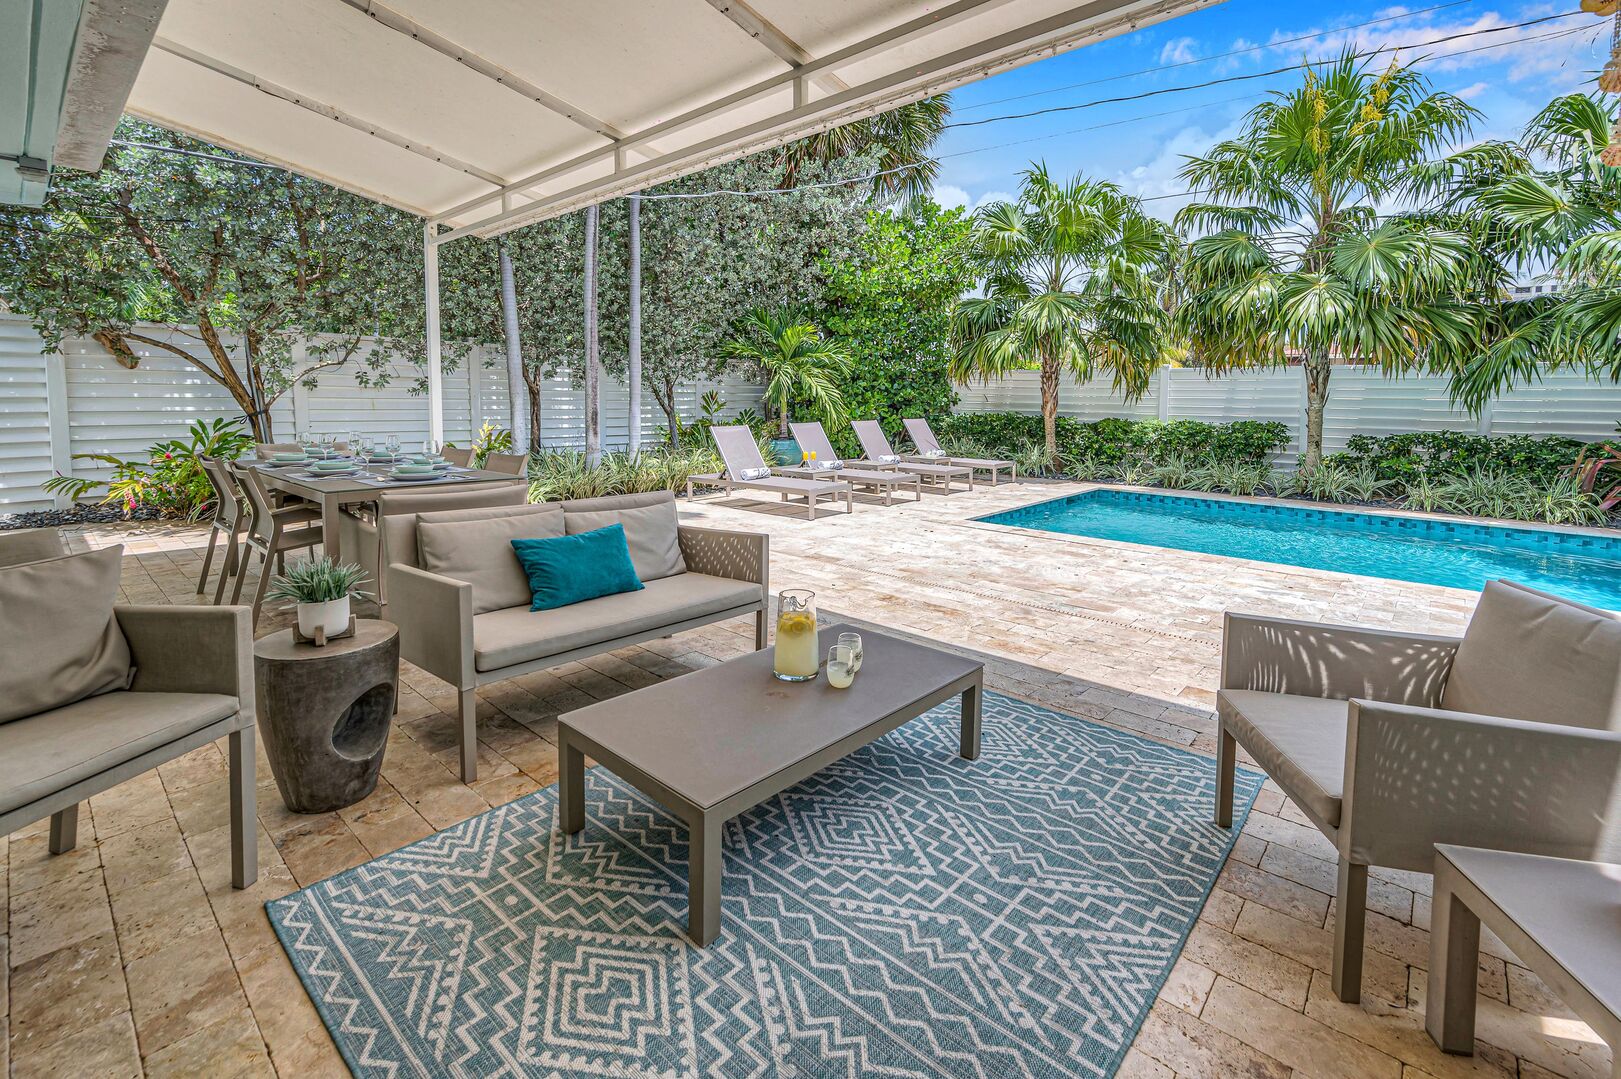 Relax and unwind by our inviting heated pool, where comfortable seating awaits to provide the perfect spot for soaking up the sun and enjoying poolside bliss.